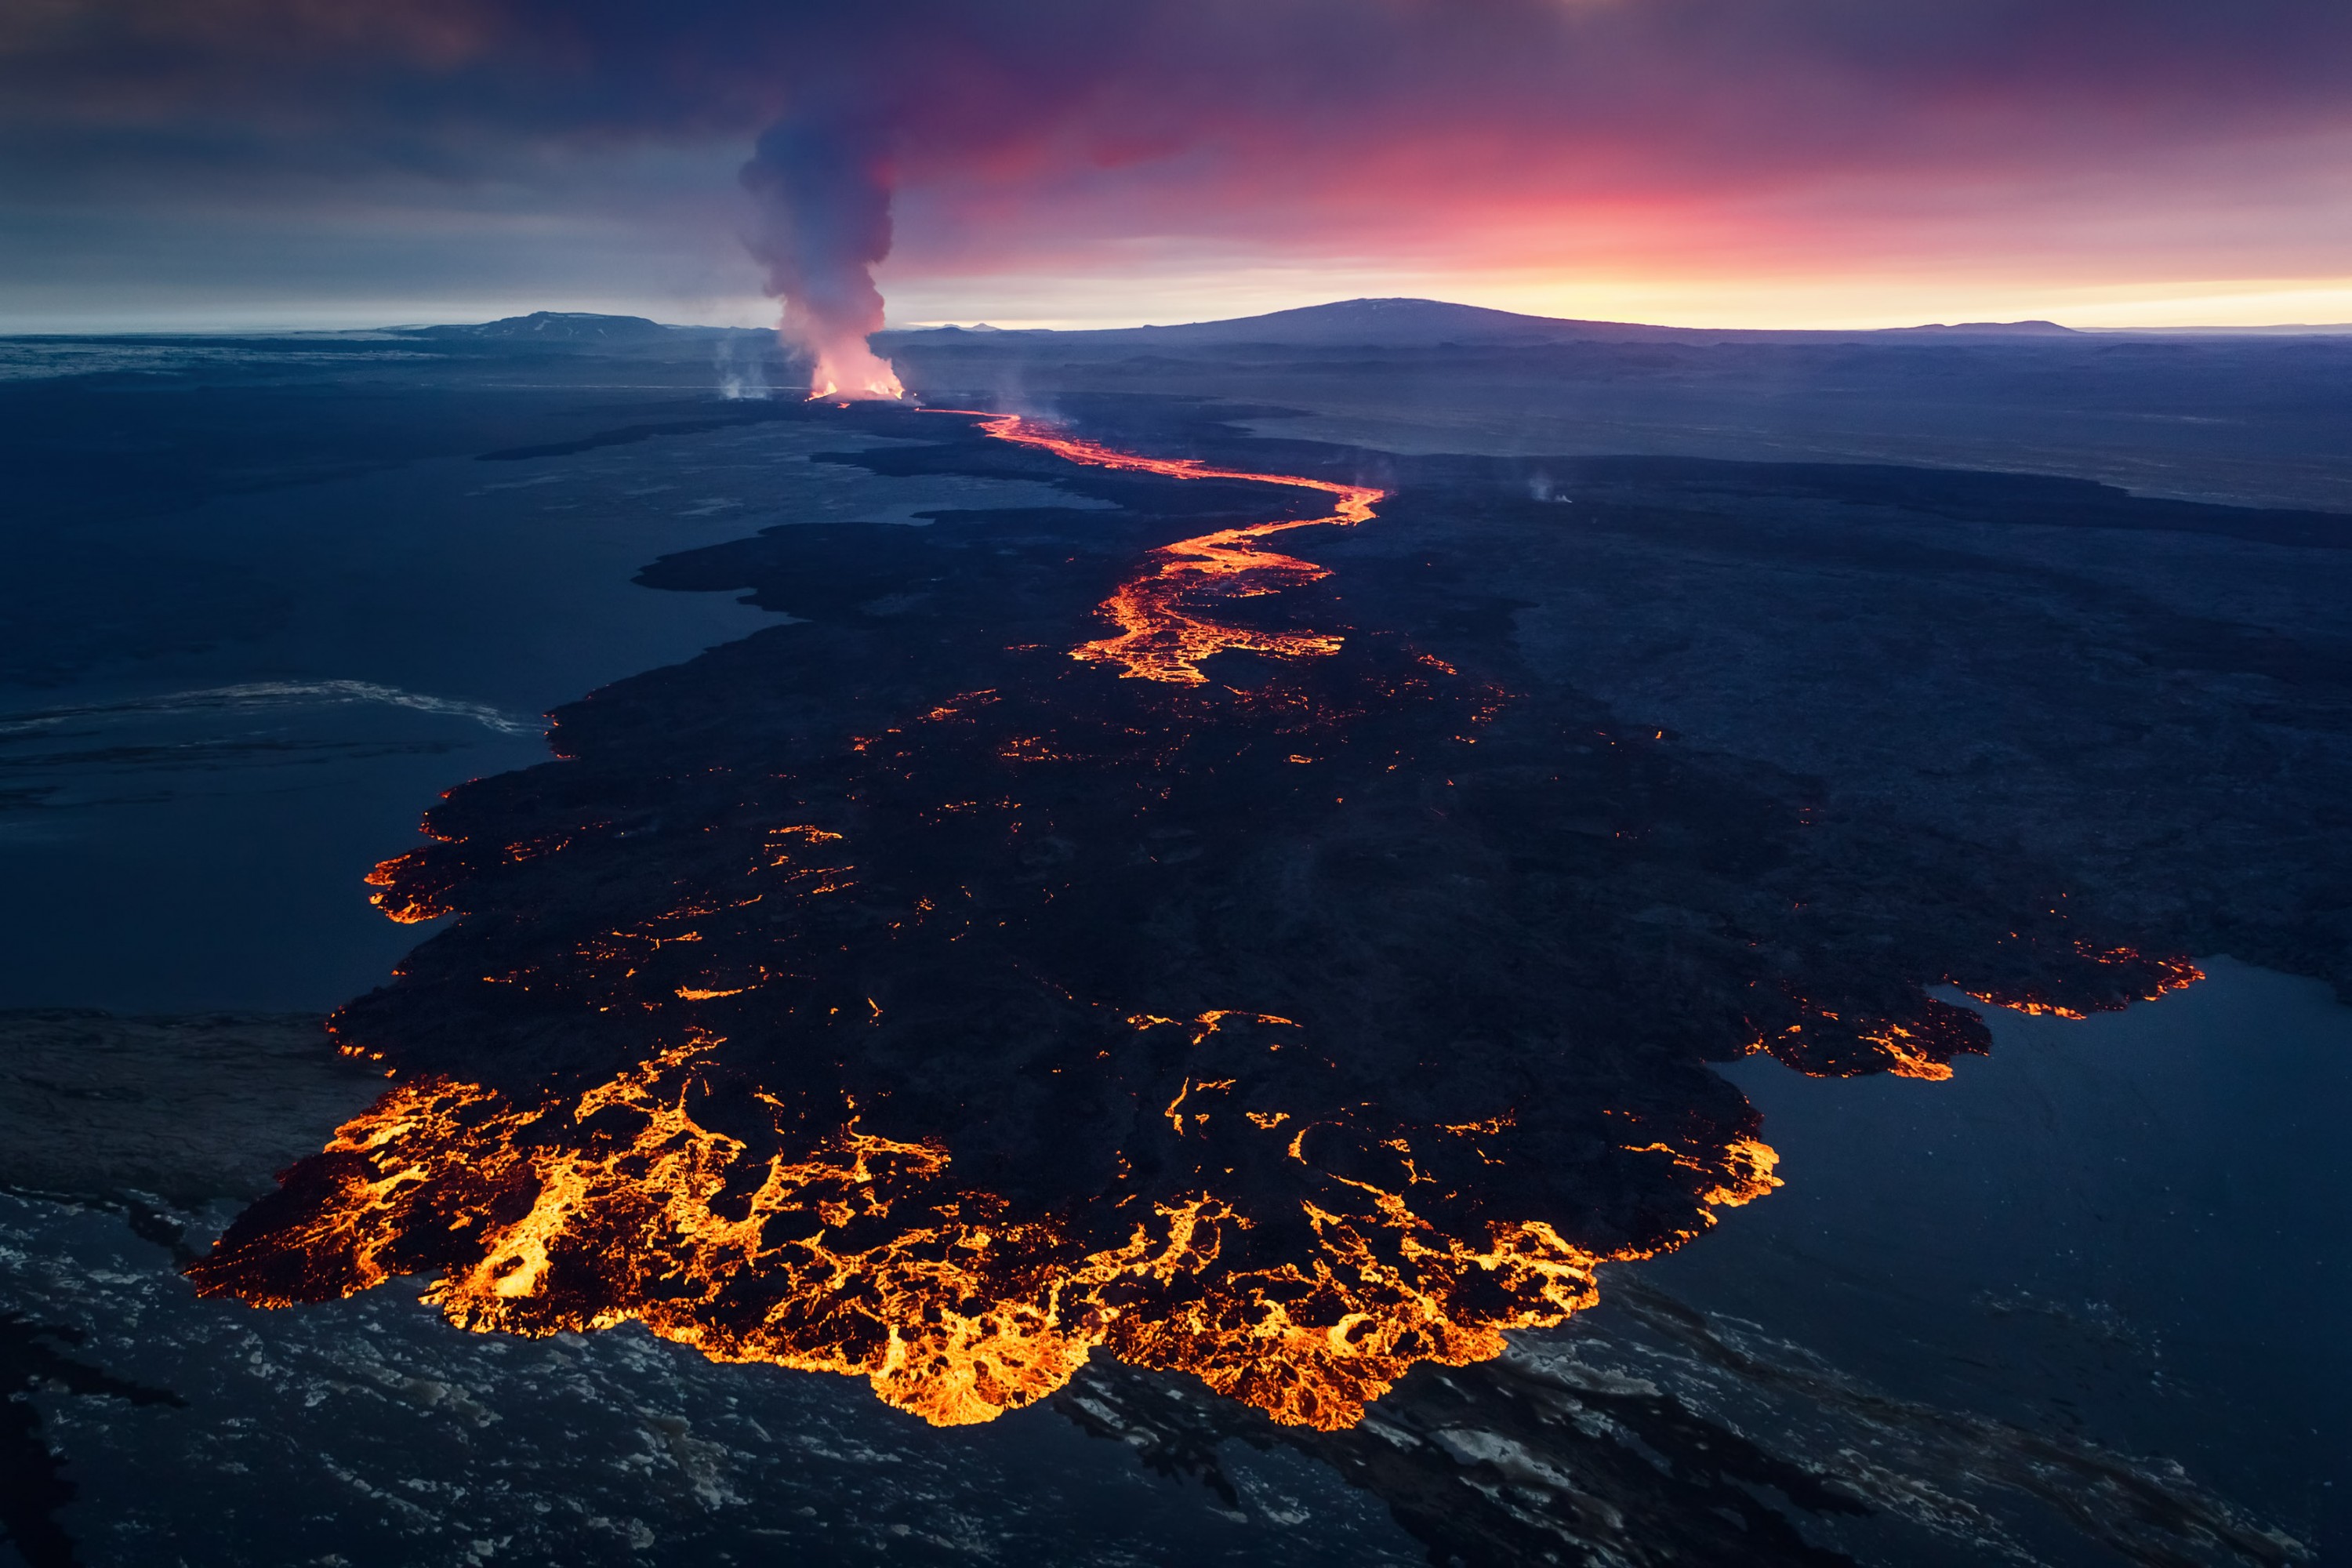 Tips & Gear For Photographing Volcanoes & Lava Flow